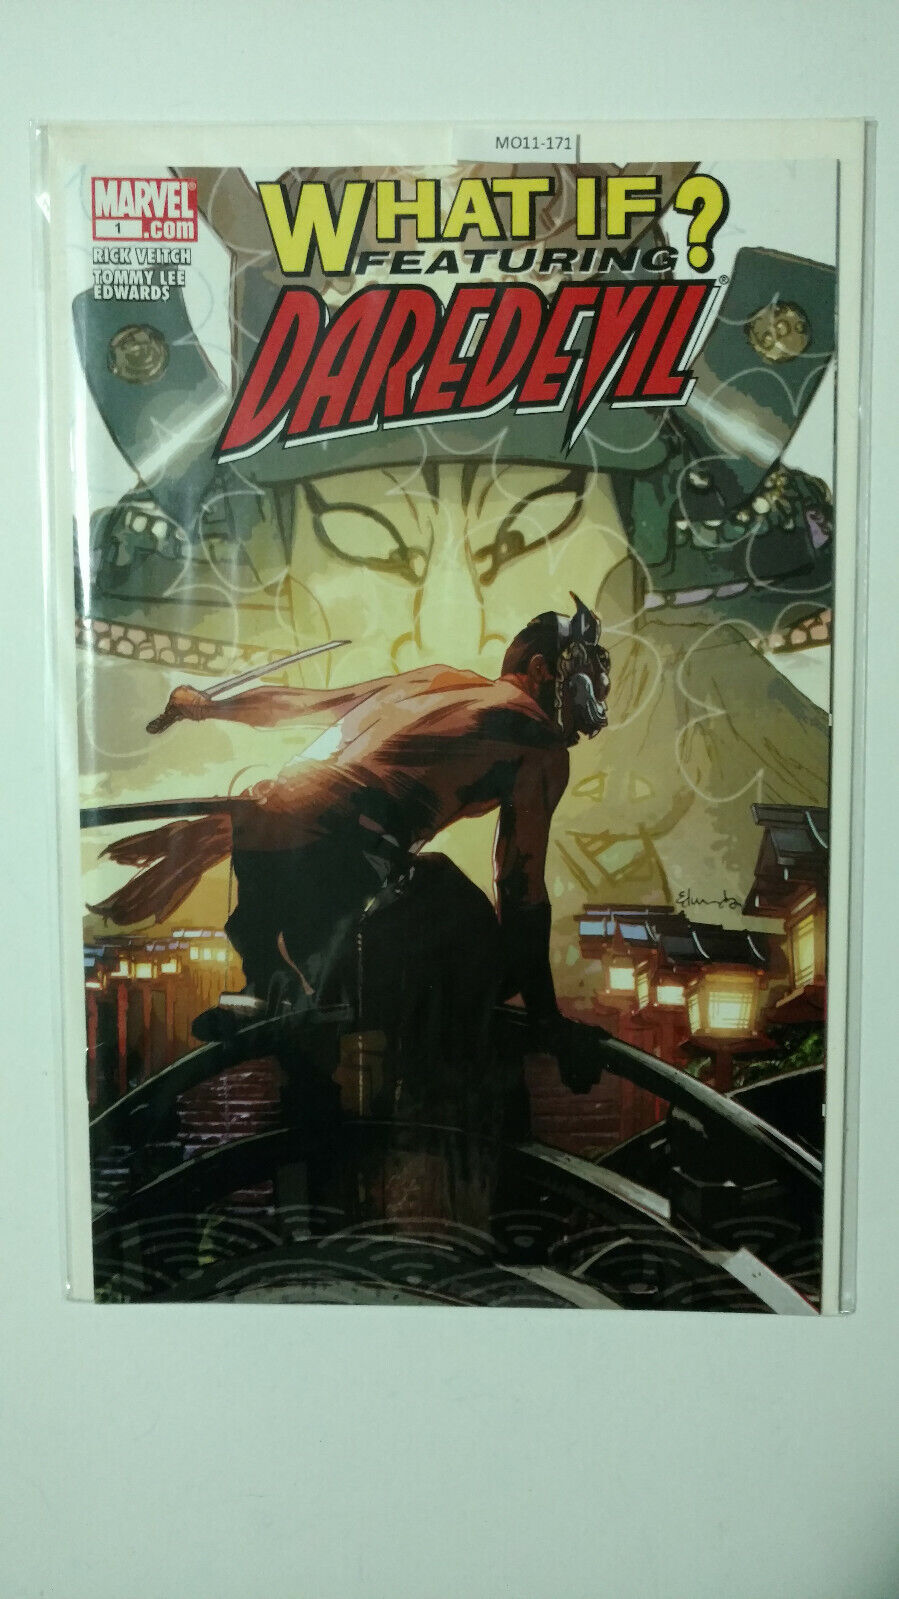 WHAT IF? FEATURING DAREDEVIL NO. 1 MARVEL HIGH GRADE COMIC BOOK MO11-171